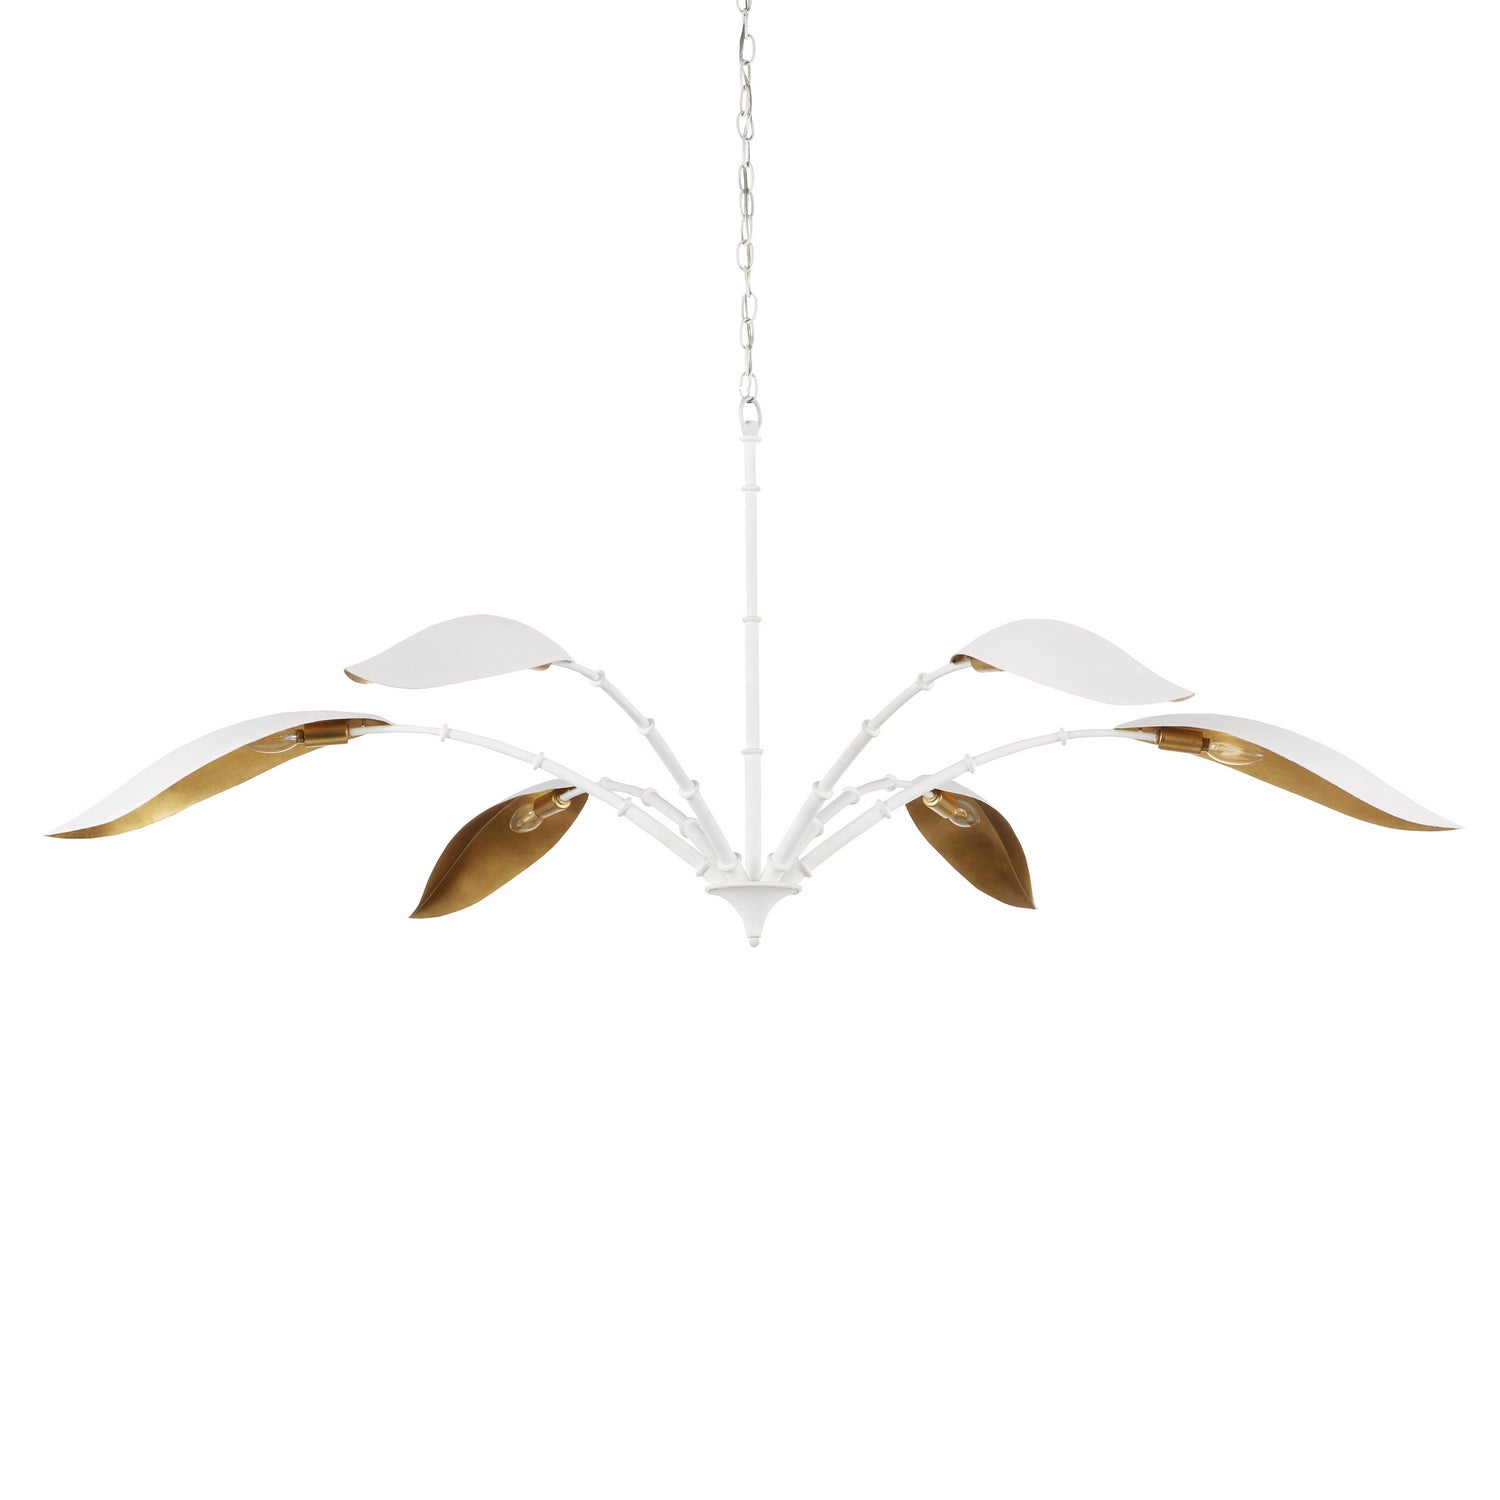 Six Light Chandelier from the Yuriko collection in Gesso White/Contemporary Gold Leaf finish